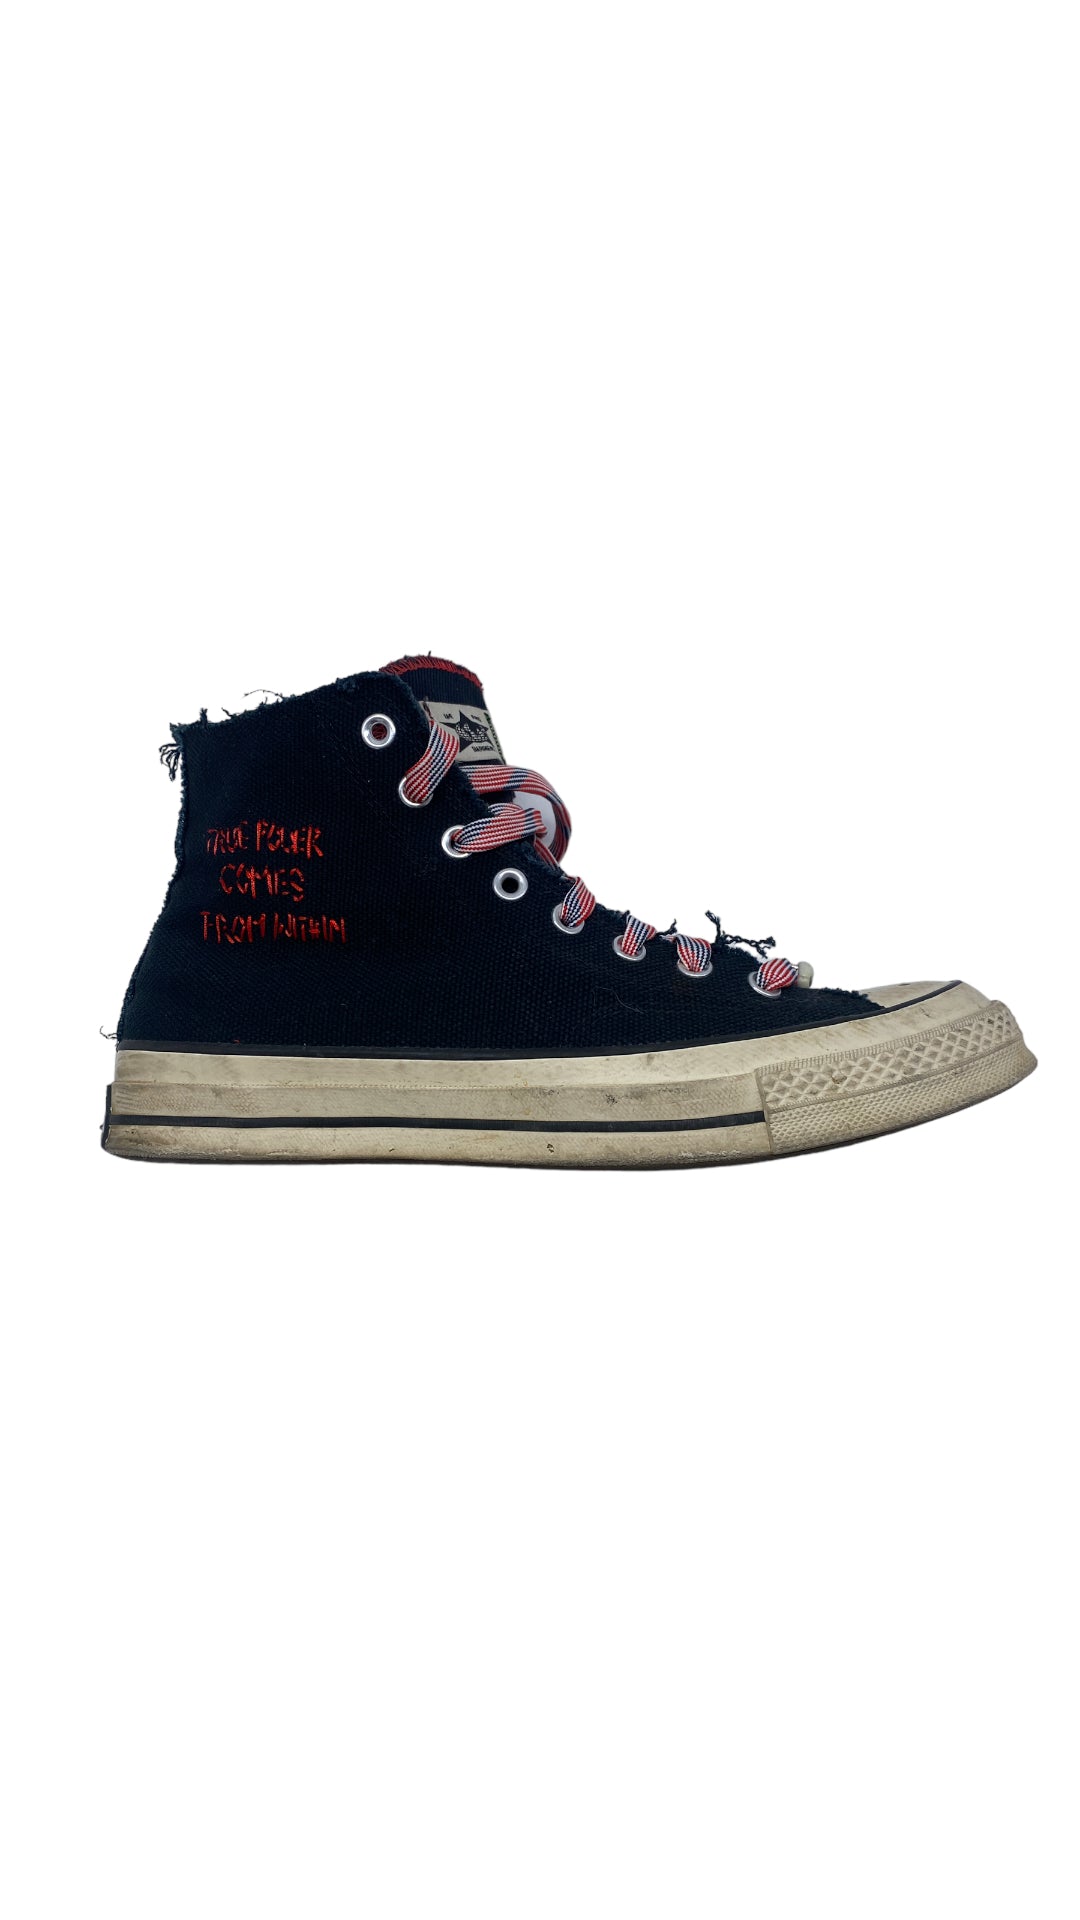 Used Converse Chuck Taylor "Breaking Barriers" Sz 9.5